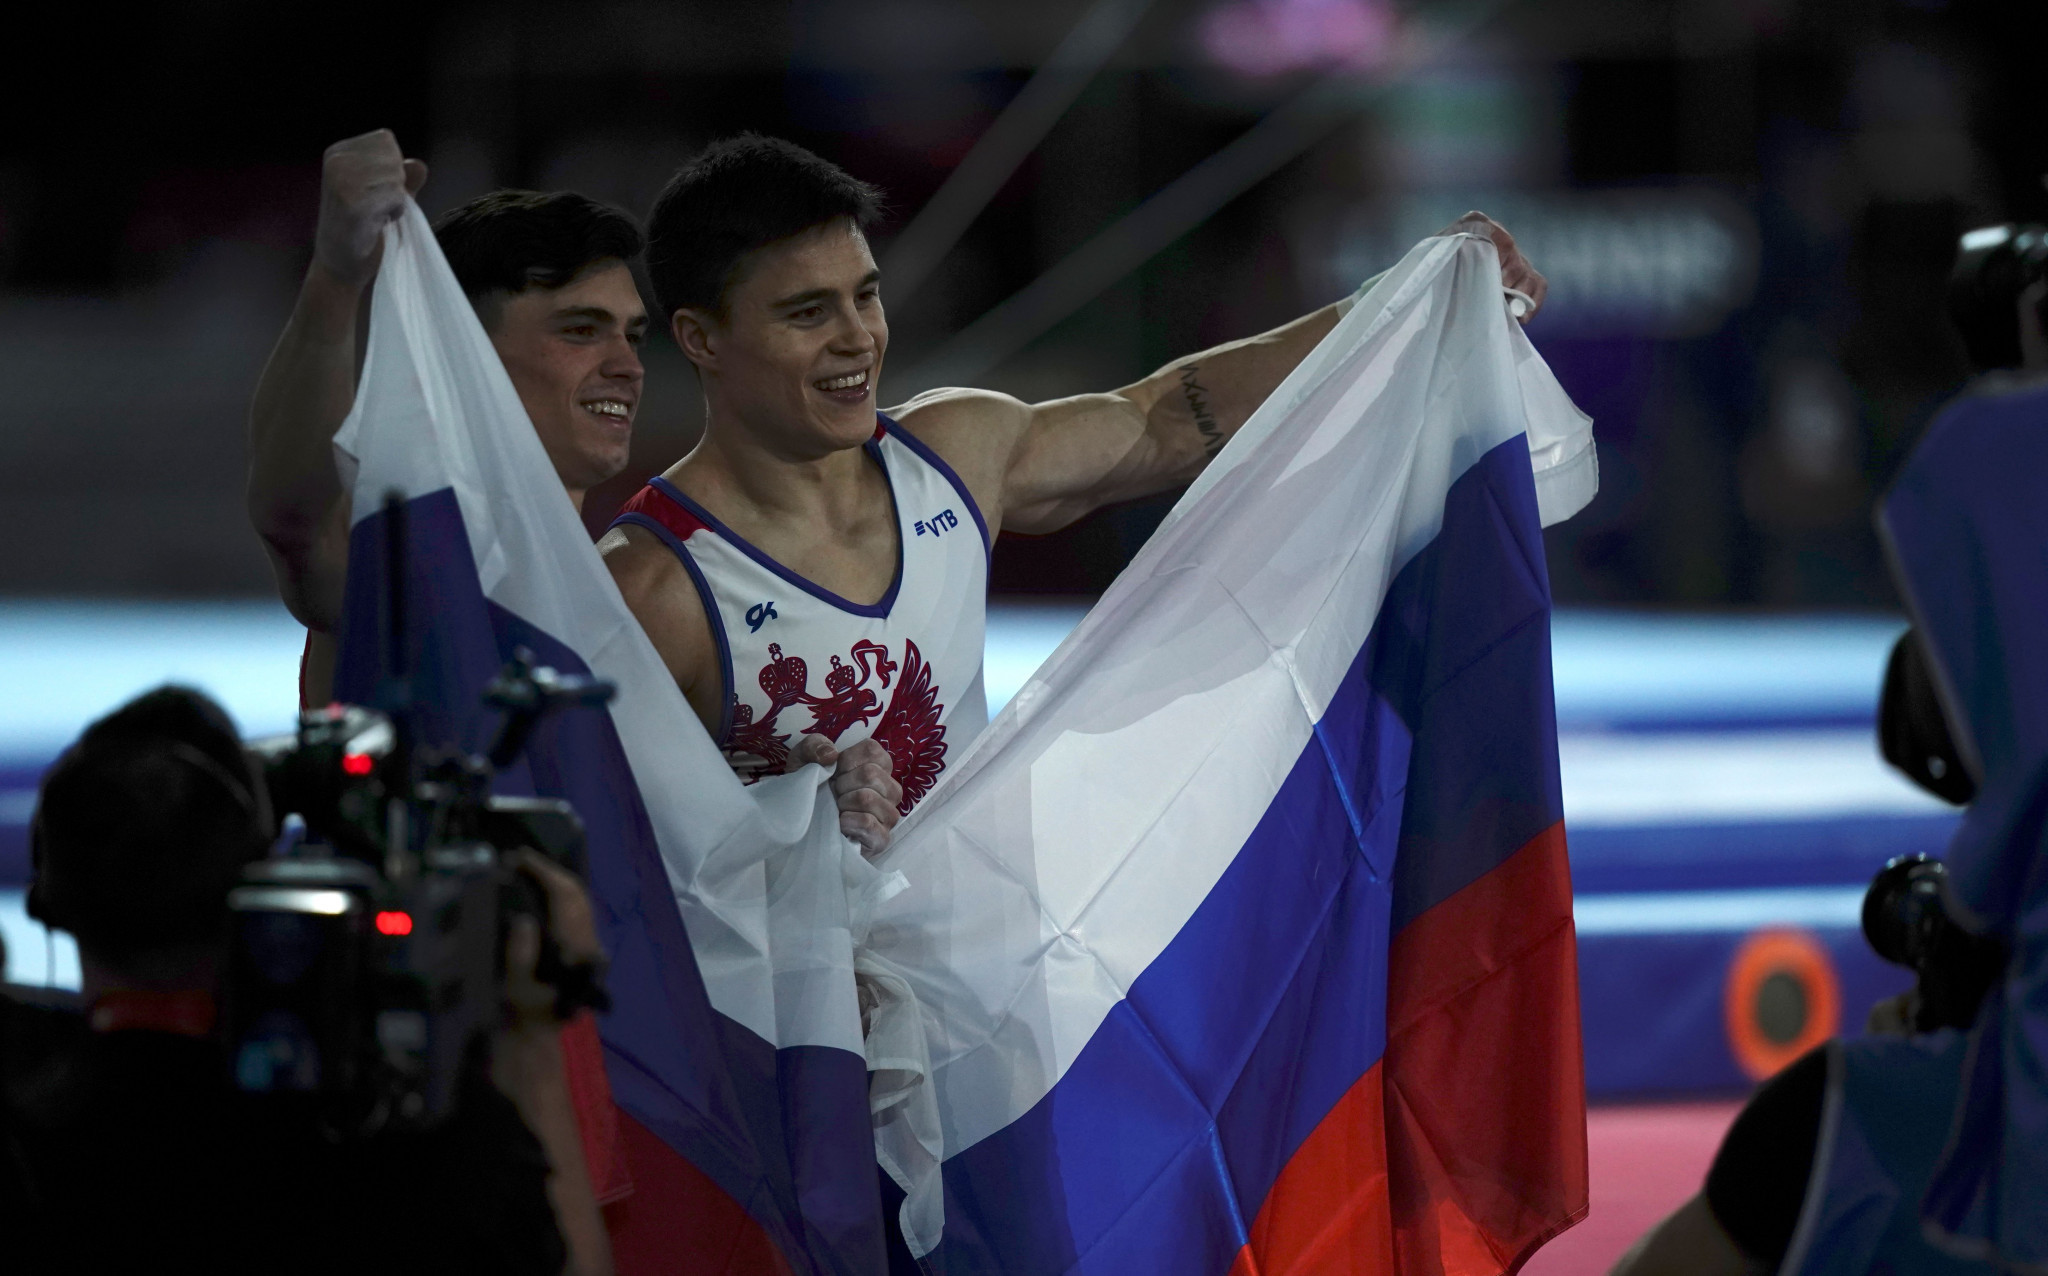 Russia's flag could be banned from major events if the World Anti-Doping Agency Executive Committee votes in favour of the CRC recommendations at its meeting in Paris next month ©Getty Images